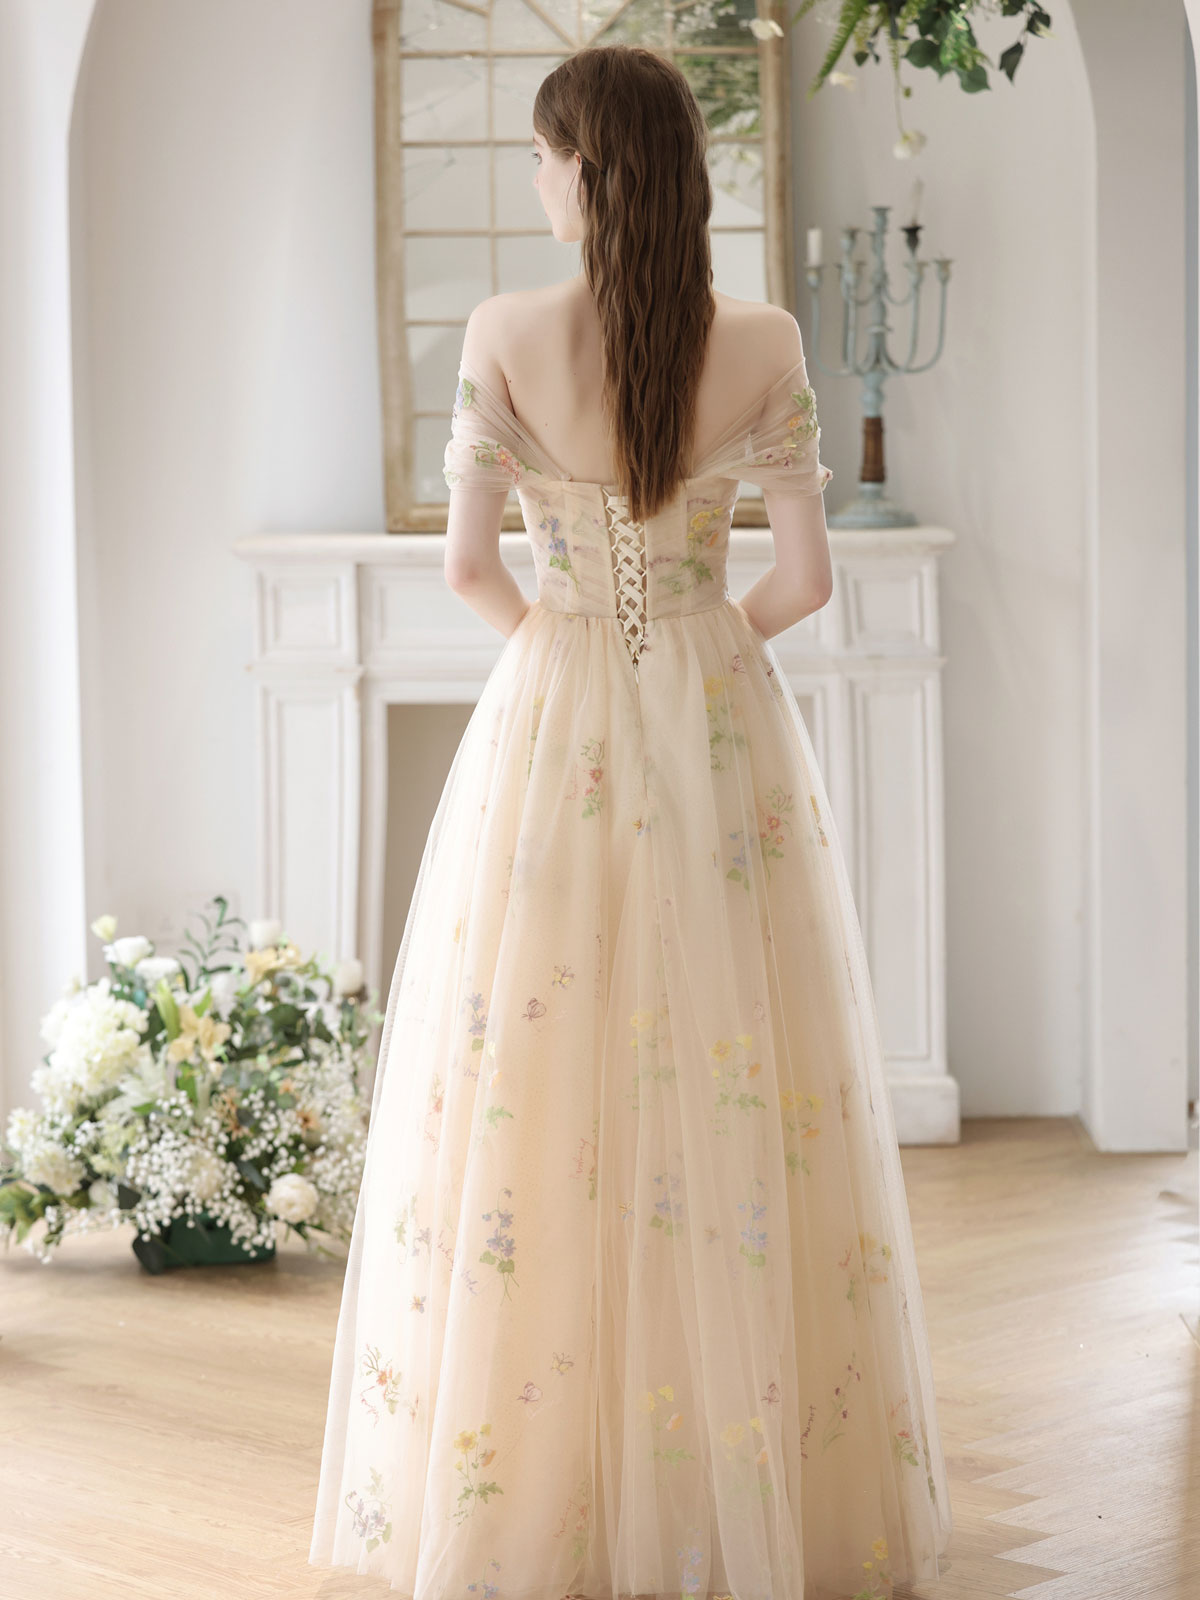 Fairytale Shiny Tulle Ballgown Princess Prom Wedding Dress with Lace  Beading Top - $192.492 #P74093 - SheProm.com